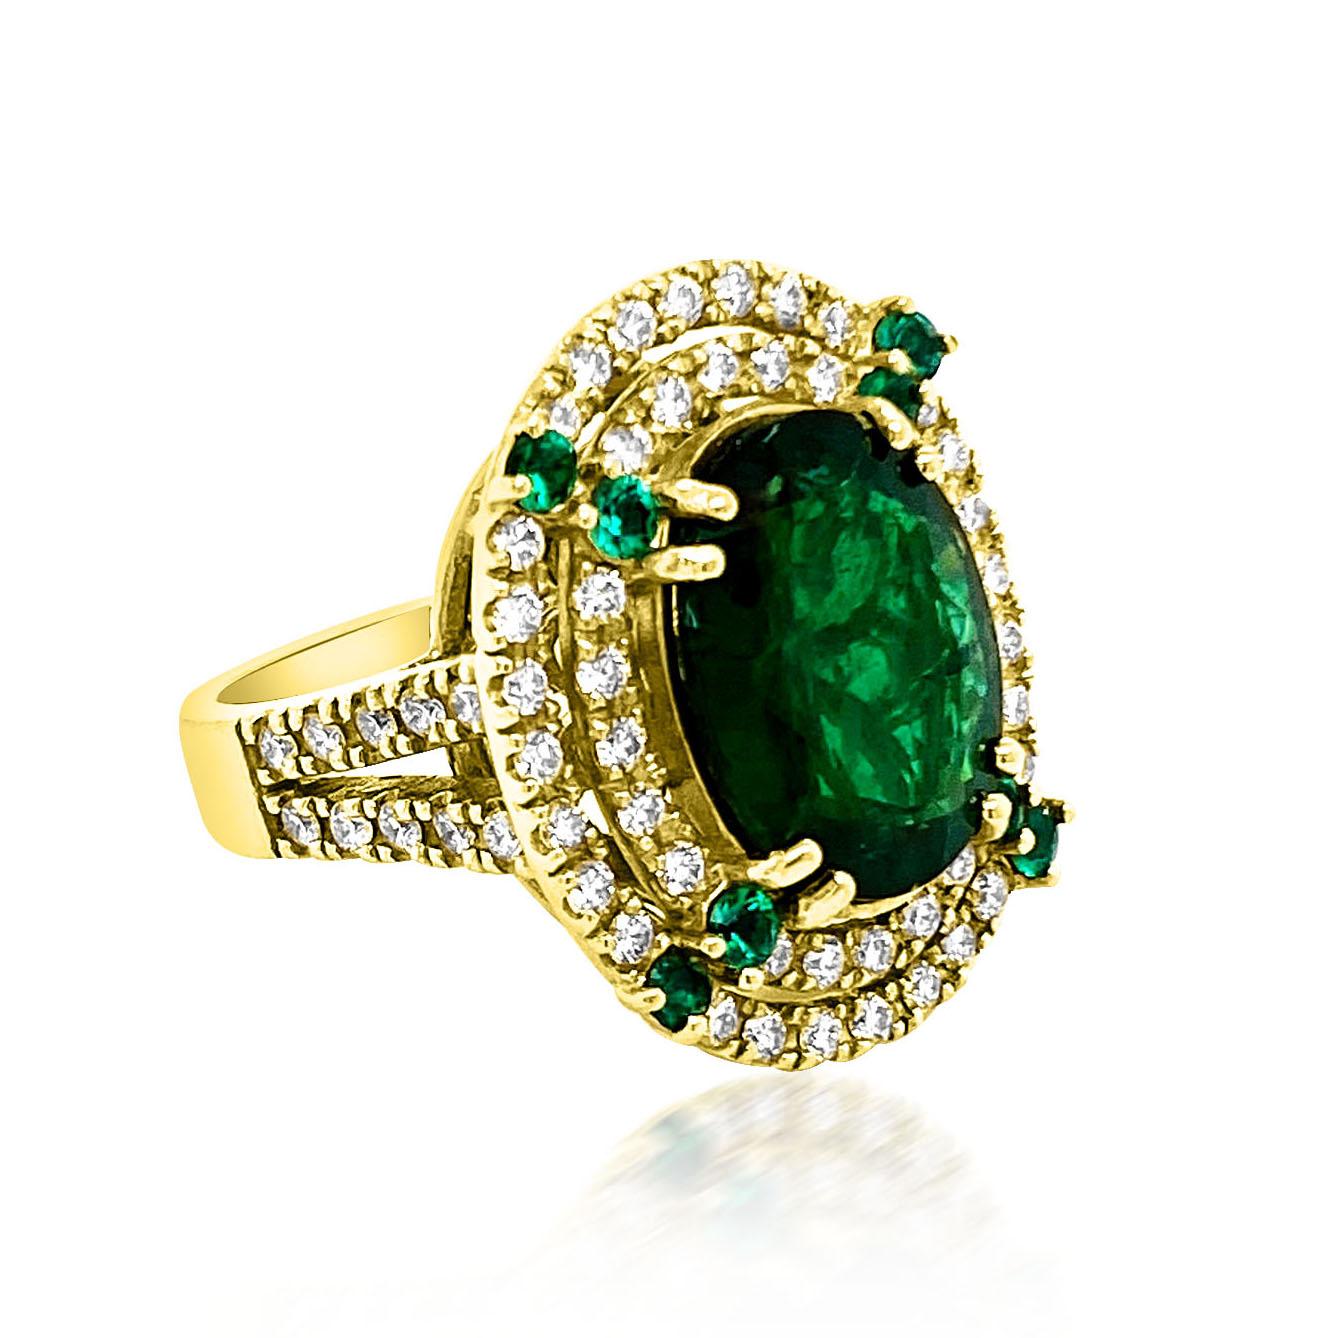 18K YELLOW GOLD :13.75GRAMS
COLOMBIAN NATURAL EMERALD(Main stone):6.58CT
NATURAL EMERALD( Side stone):0.33ct
DIAMOND:1.33CT
GIA #1186103084
**Of all gemstones, Emerald is the purest crystalline emanation of the Green Ray, color of the heart chakra. 